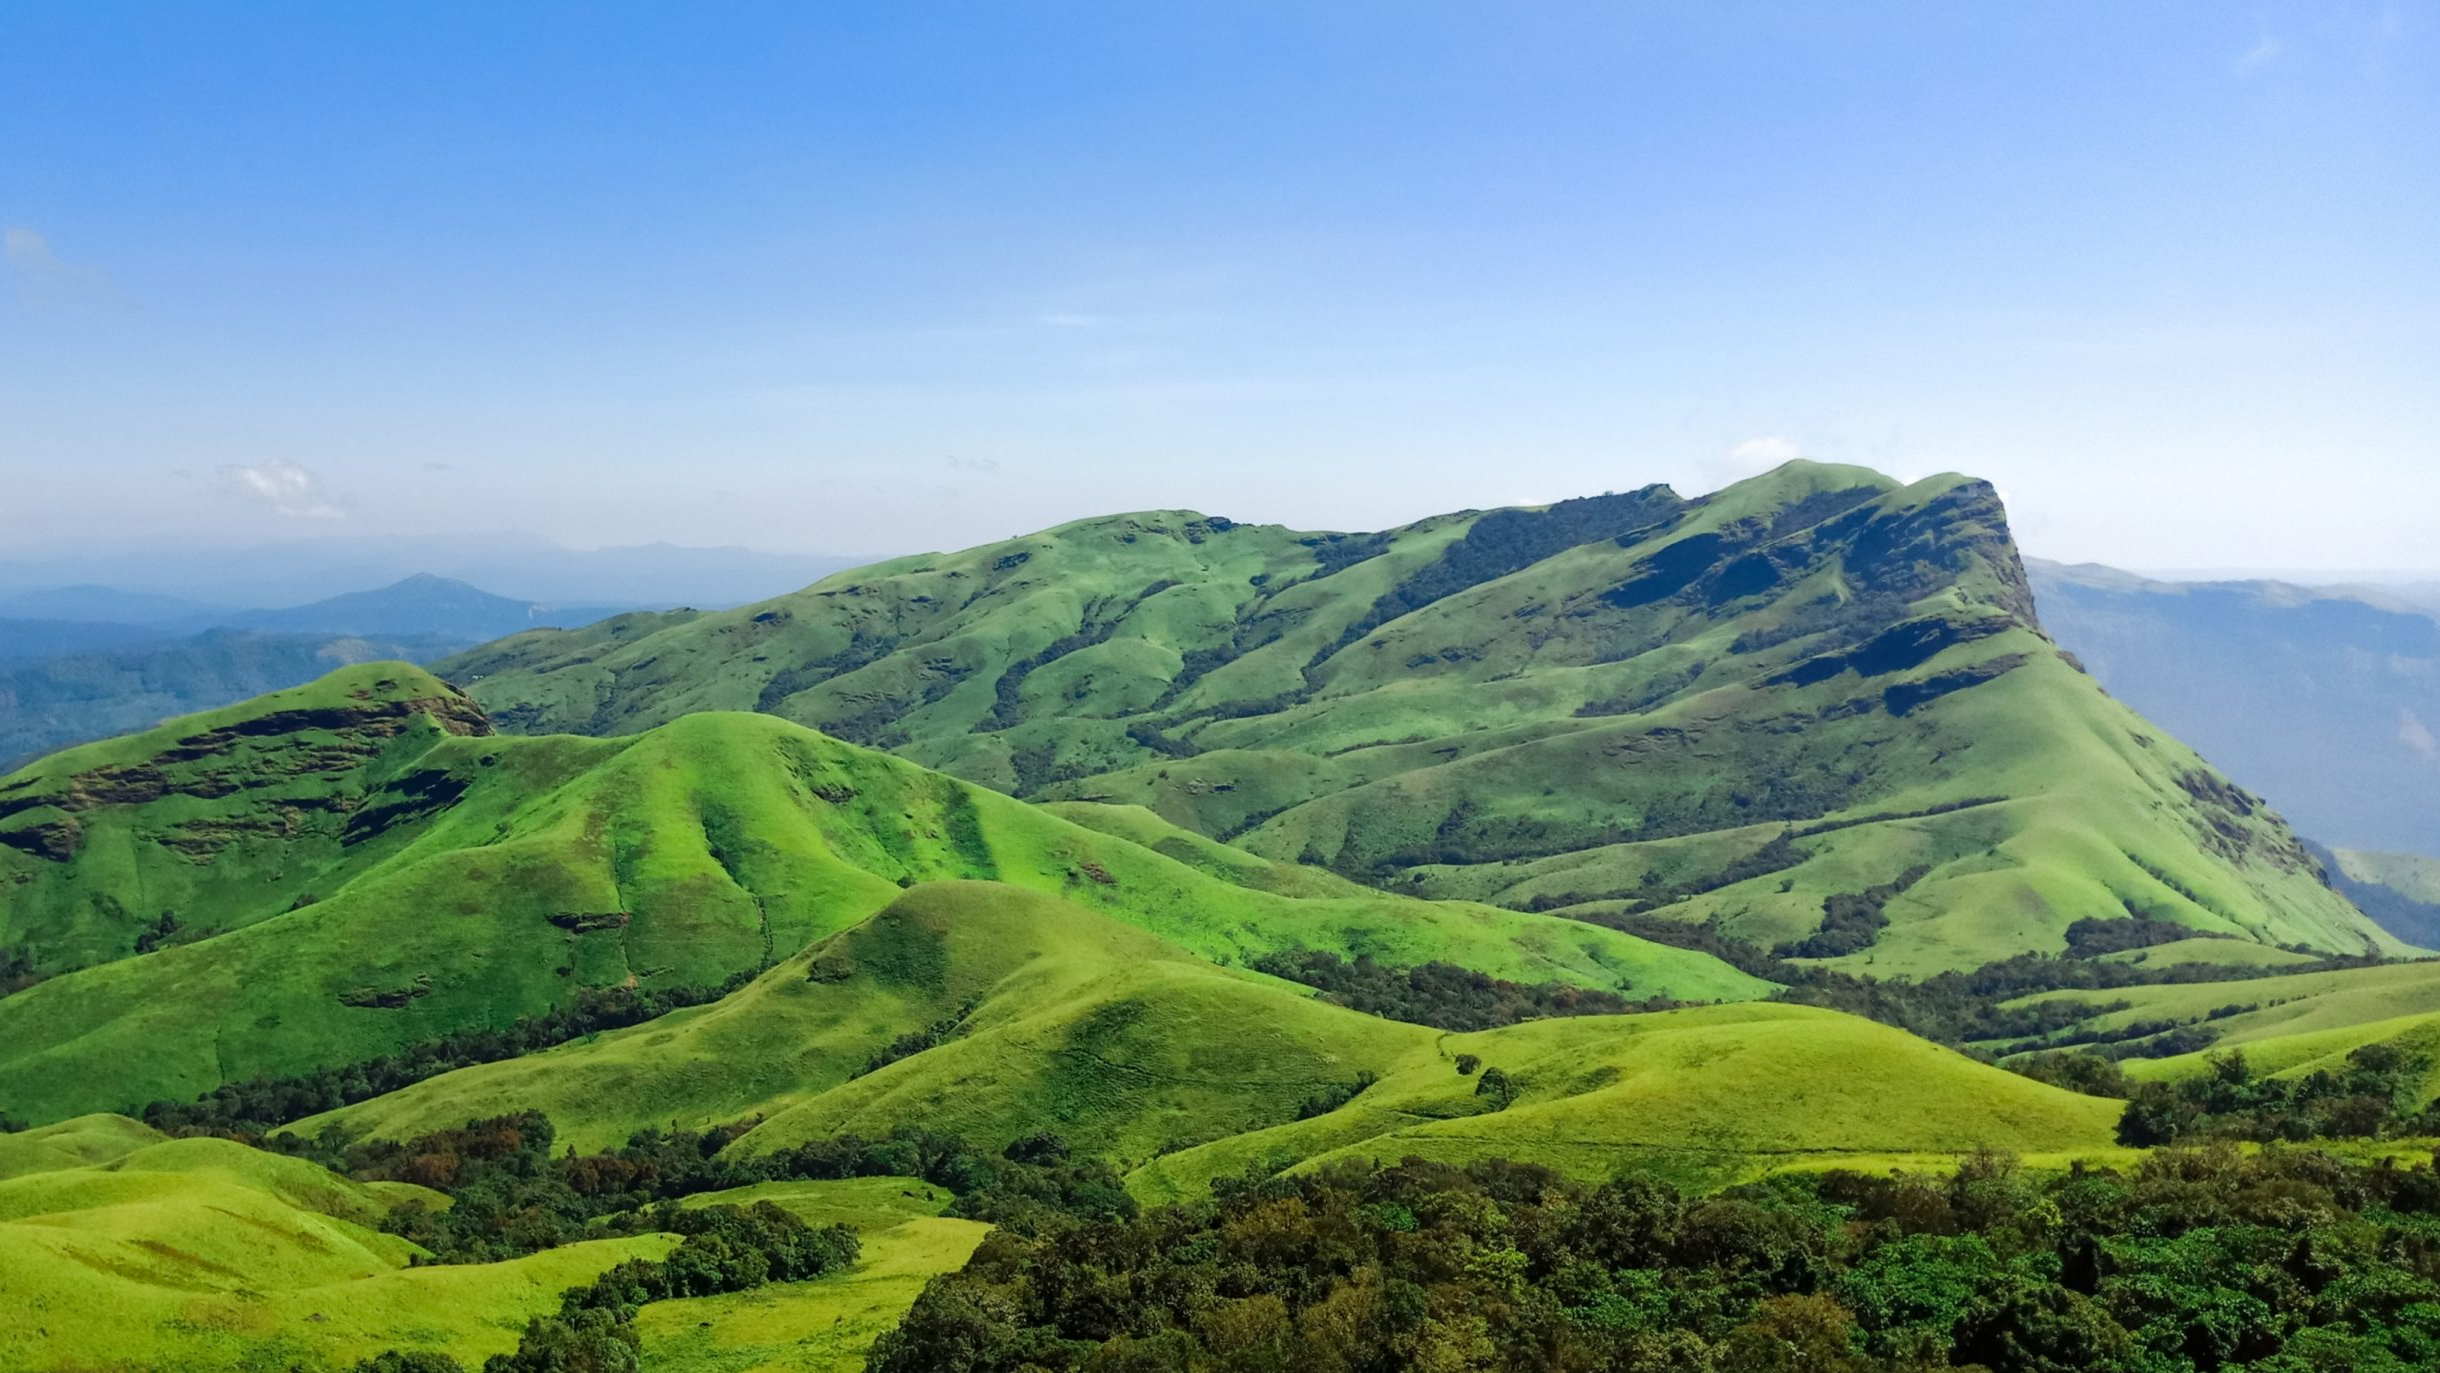 Kudremukh is a perfect weekend getaway when visiting hill stations near Goa